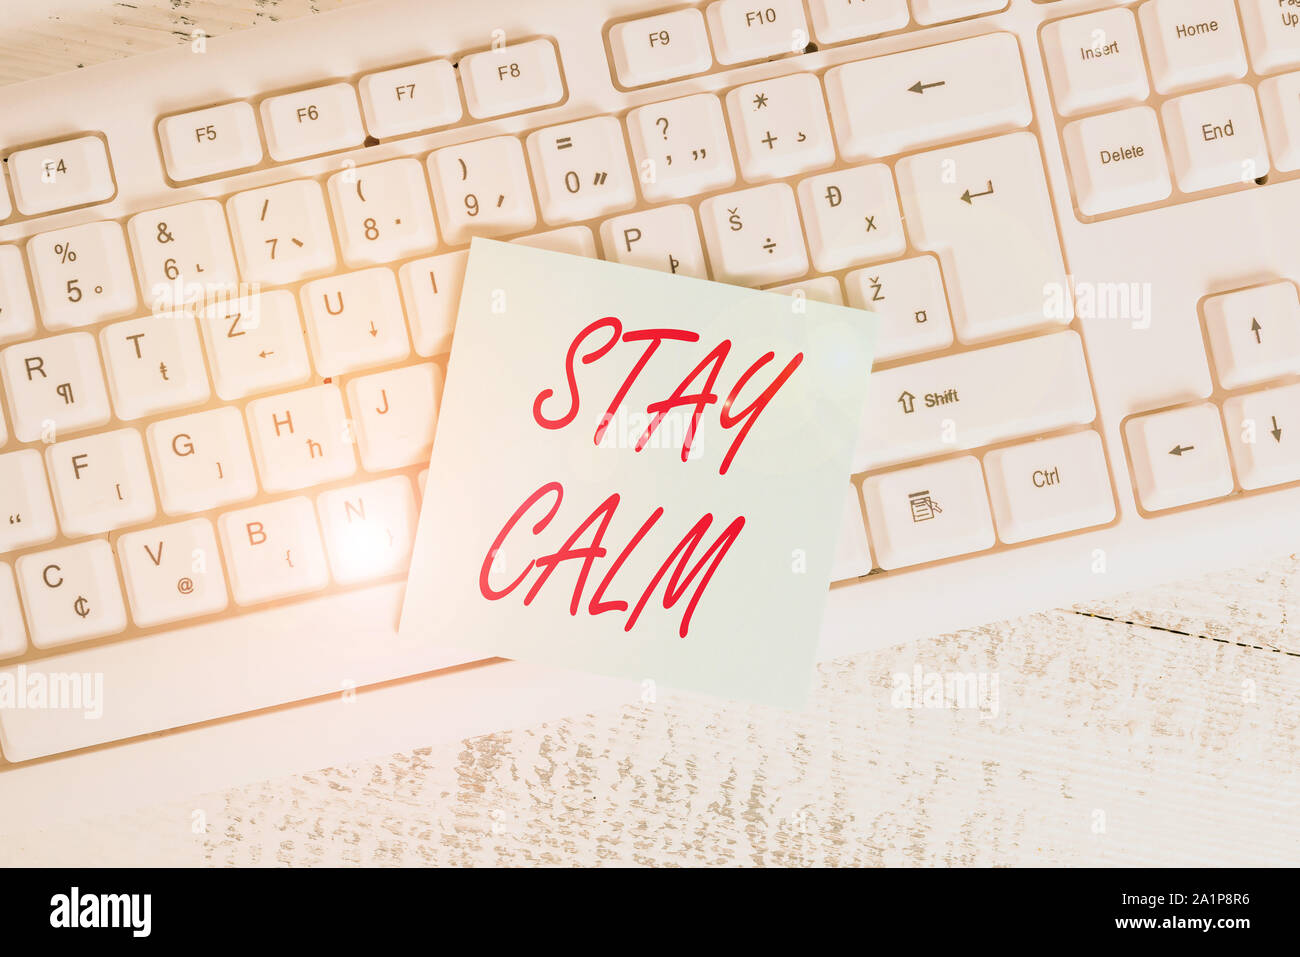 Conceptual hand writing showing Stay Calm. Concept meaning Maintain in a state of motion smoothly even under pressure Keyboard office supplies rectang Stock Photo